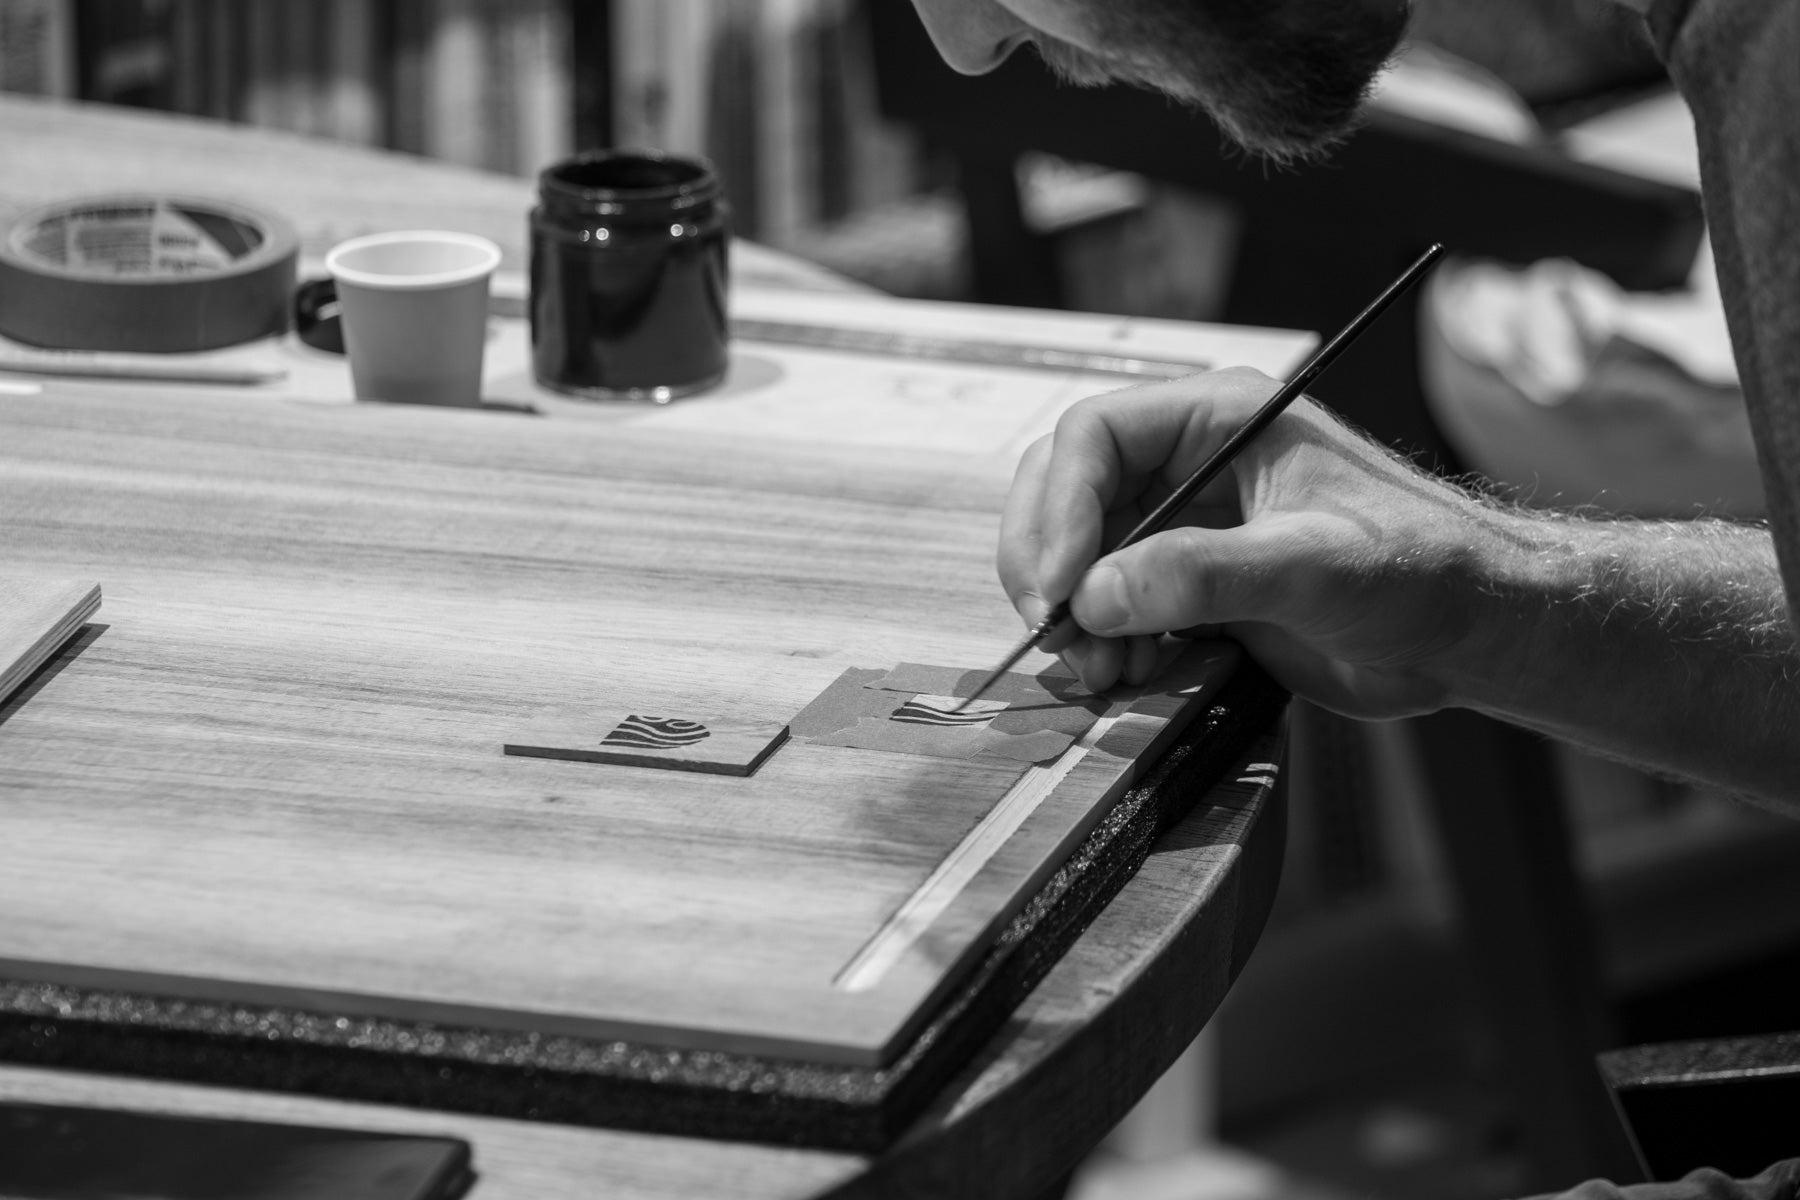 Phillip carefully paints the Woodfort Case logo onto the inside of a case's wooden panel.